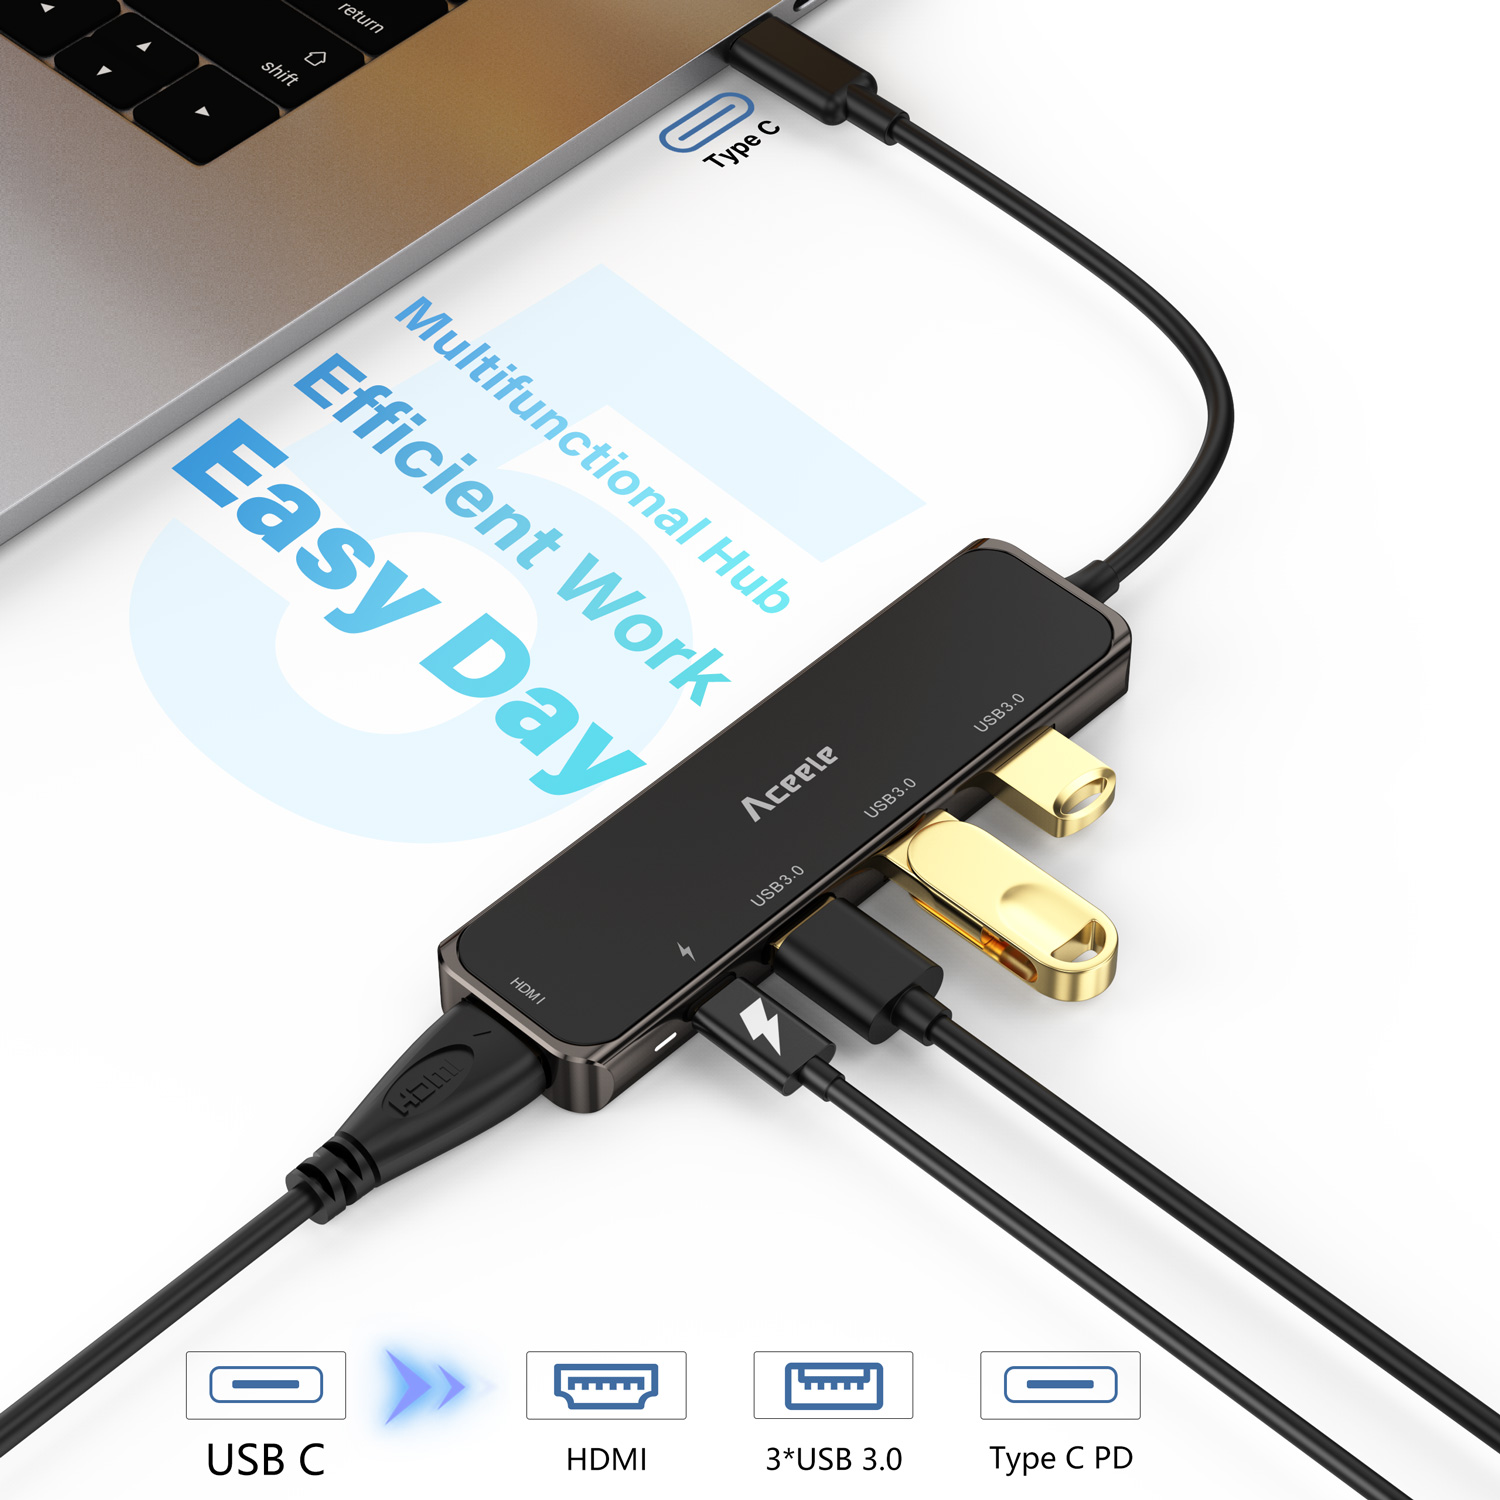 03-90359 USB C Hub, Aceele Thunderbolt 3 Multiport Adapter Dongle with HDMI, USBC Power Delivery Charging, 3 USB 3.0 Ports for MacBook Pro, iPad, Chromebook, XPS 13, Type C Laptop Samsung Tab